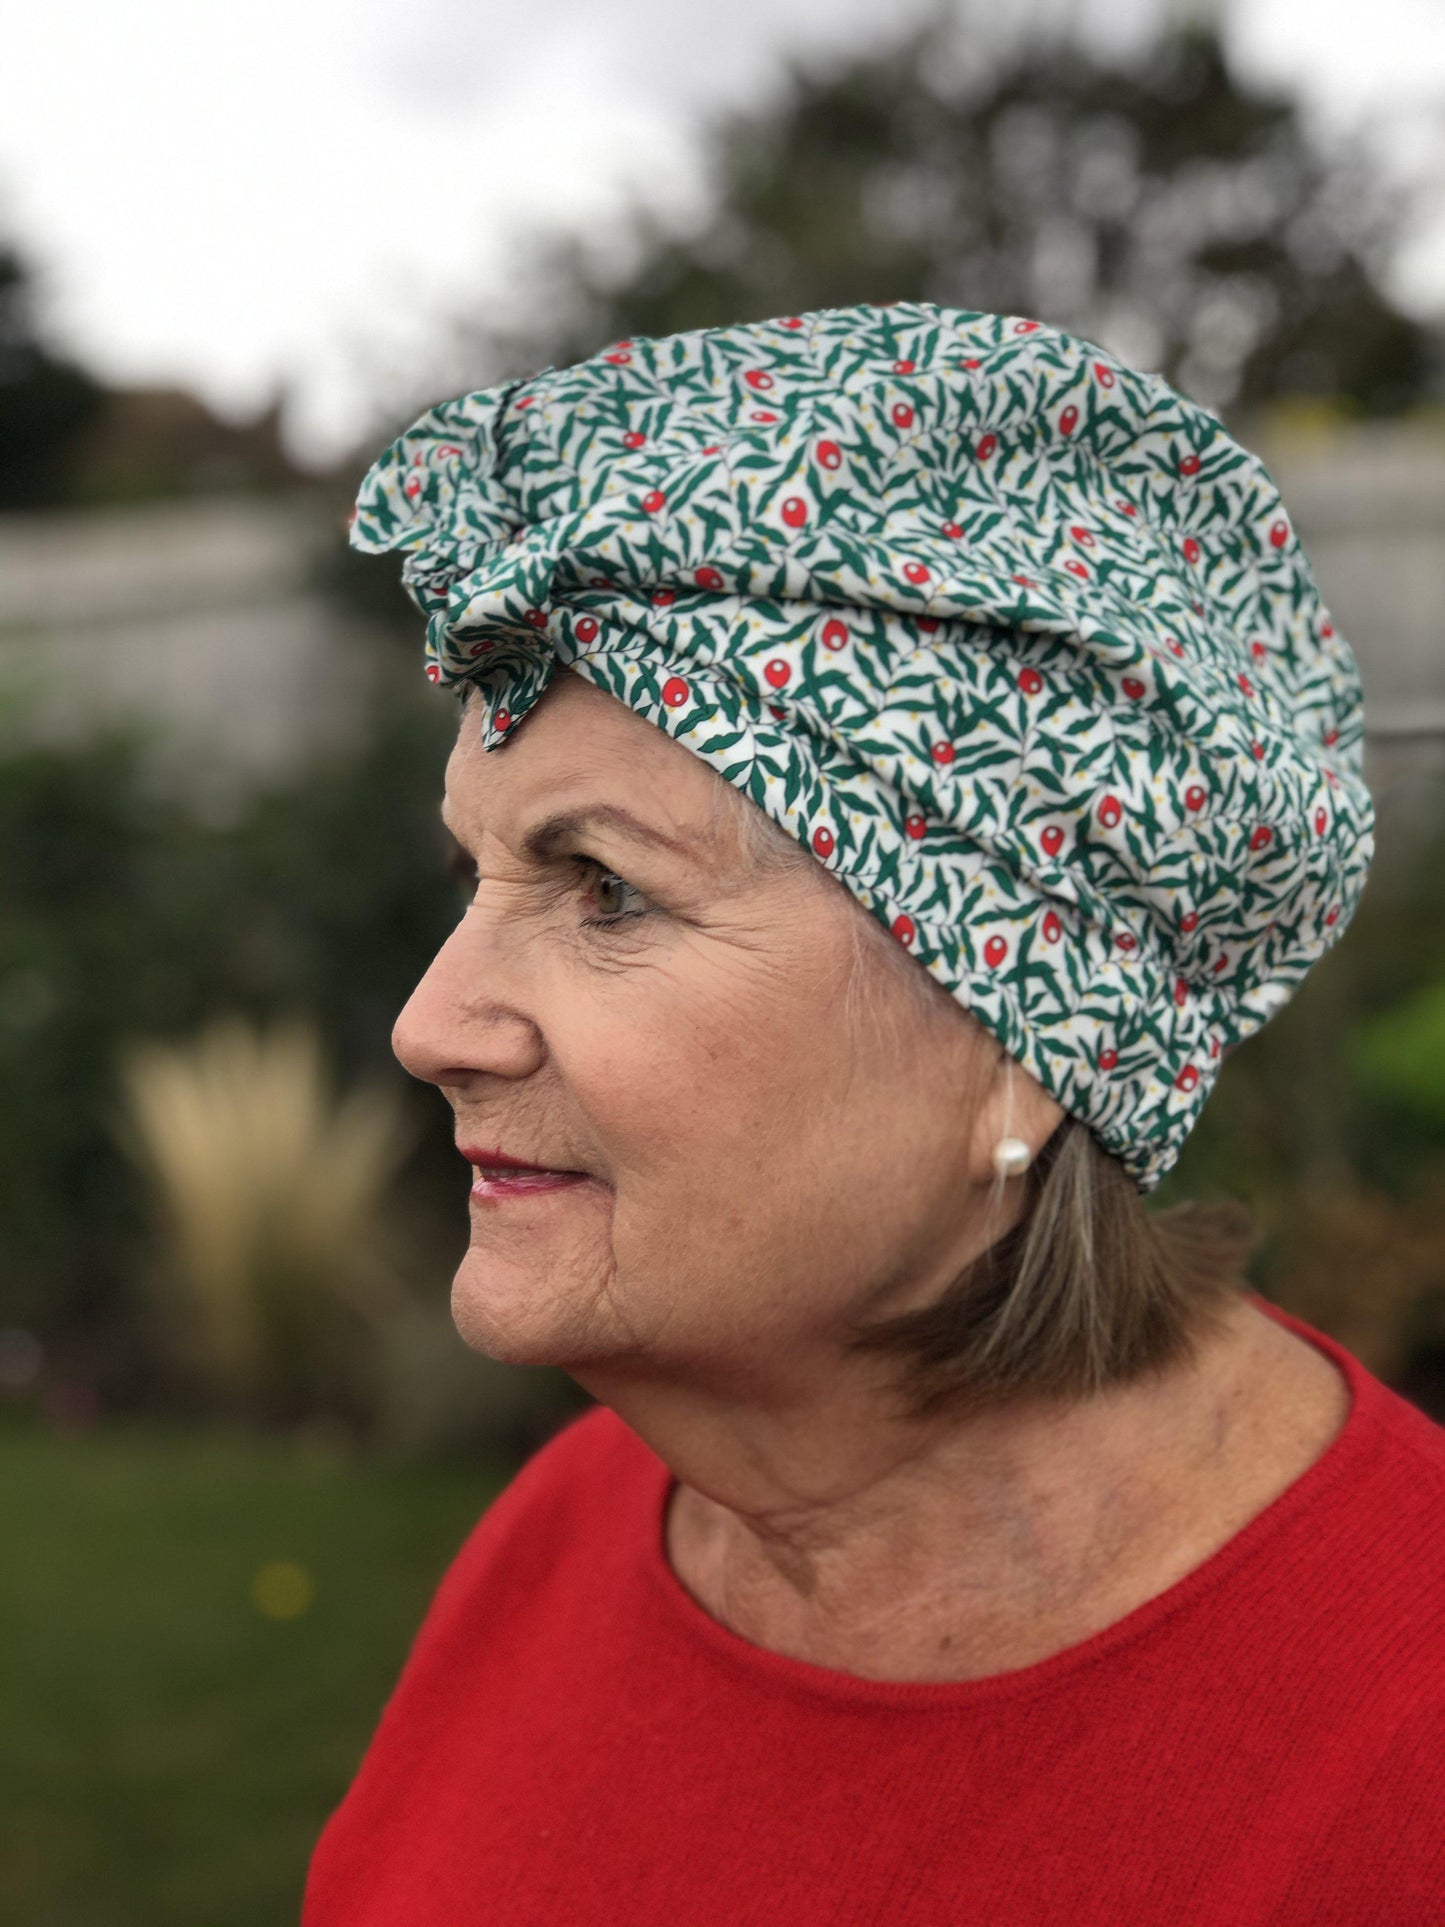 SMALL & Silk lined Turban Hat - Liberty of London Juniper Berry Red & Green floral print